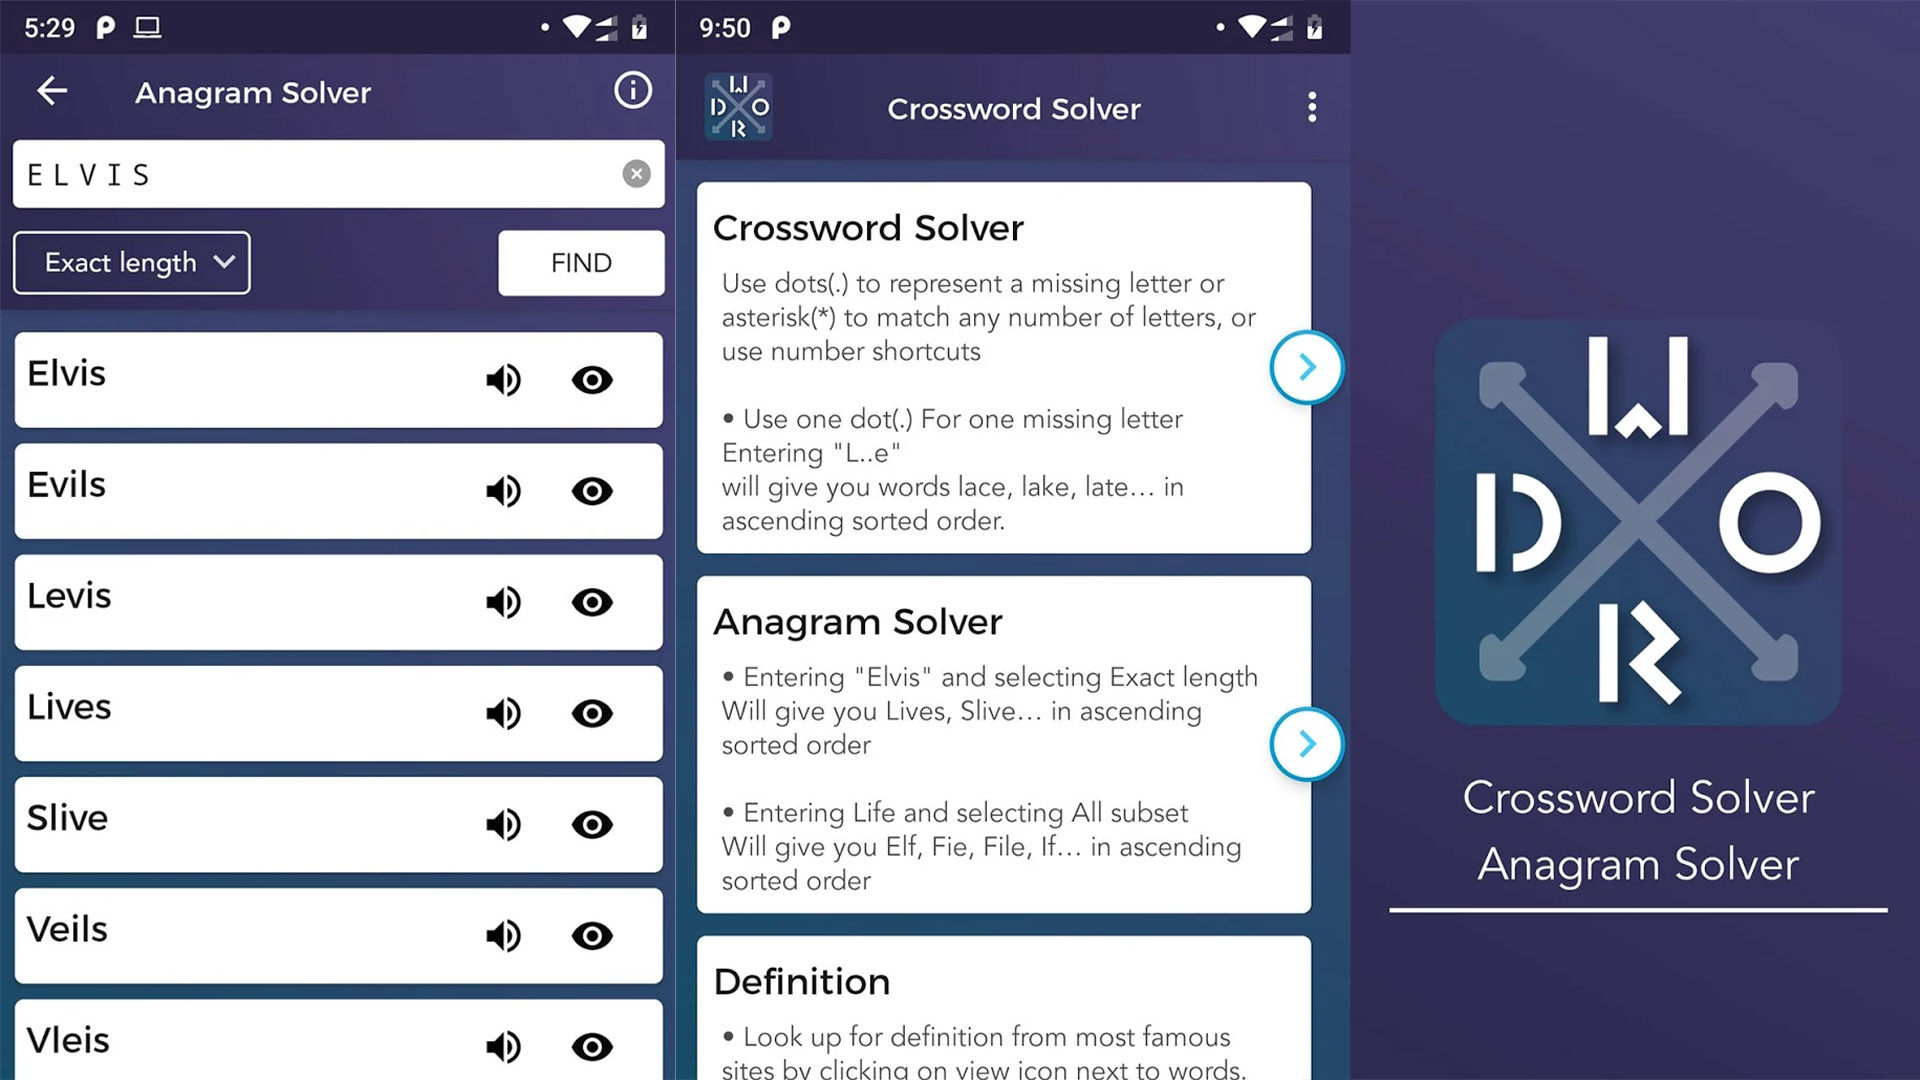 Crossword Solver lithiumapps screenshot for the best crossword solvers for android